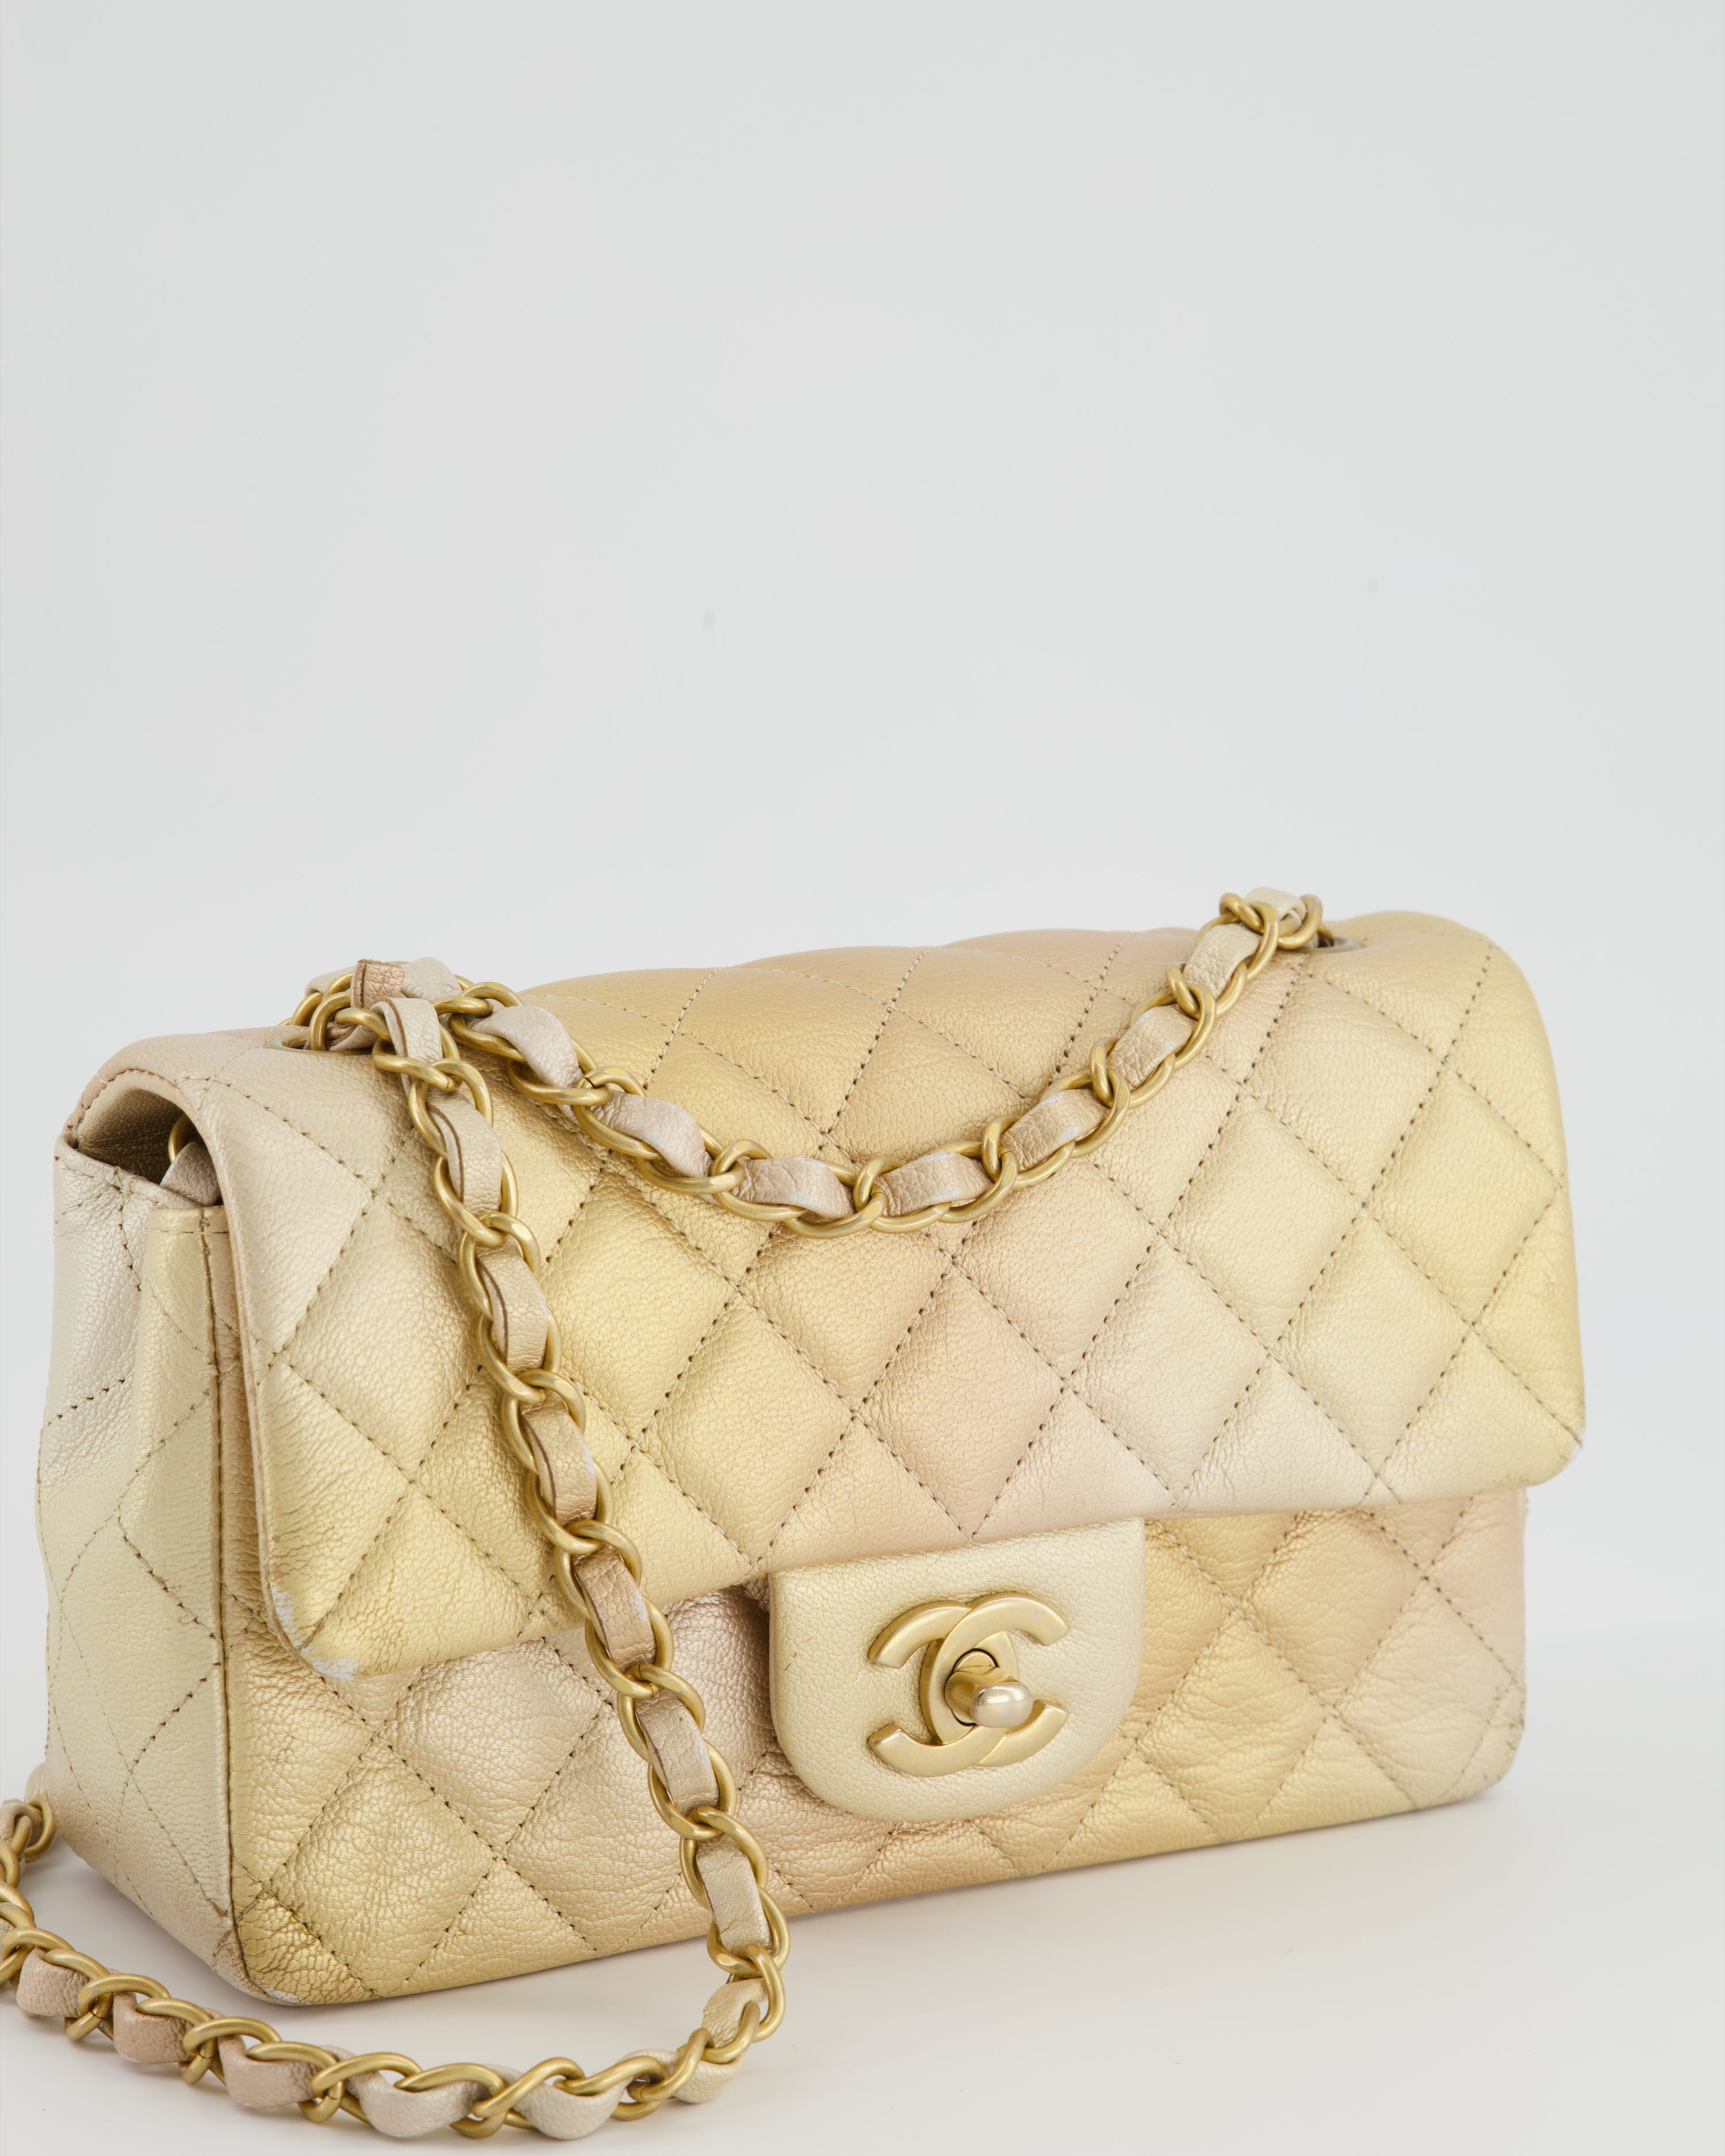 Chanel Mini Rectangular Flap Bag with Top Handle Green Ombre Lambskin  Antique Gold Hardware